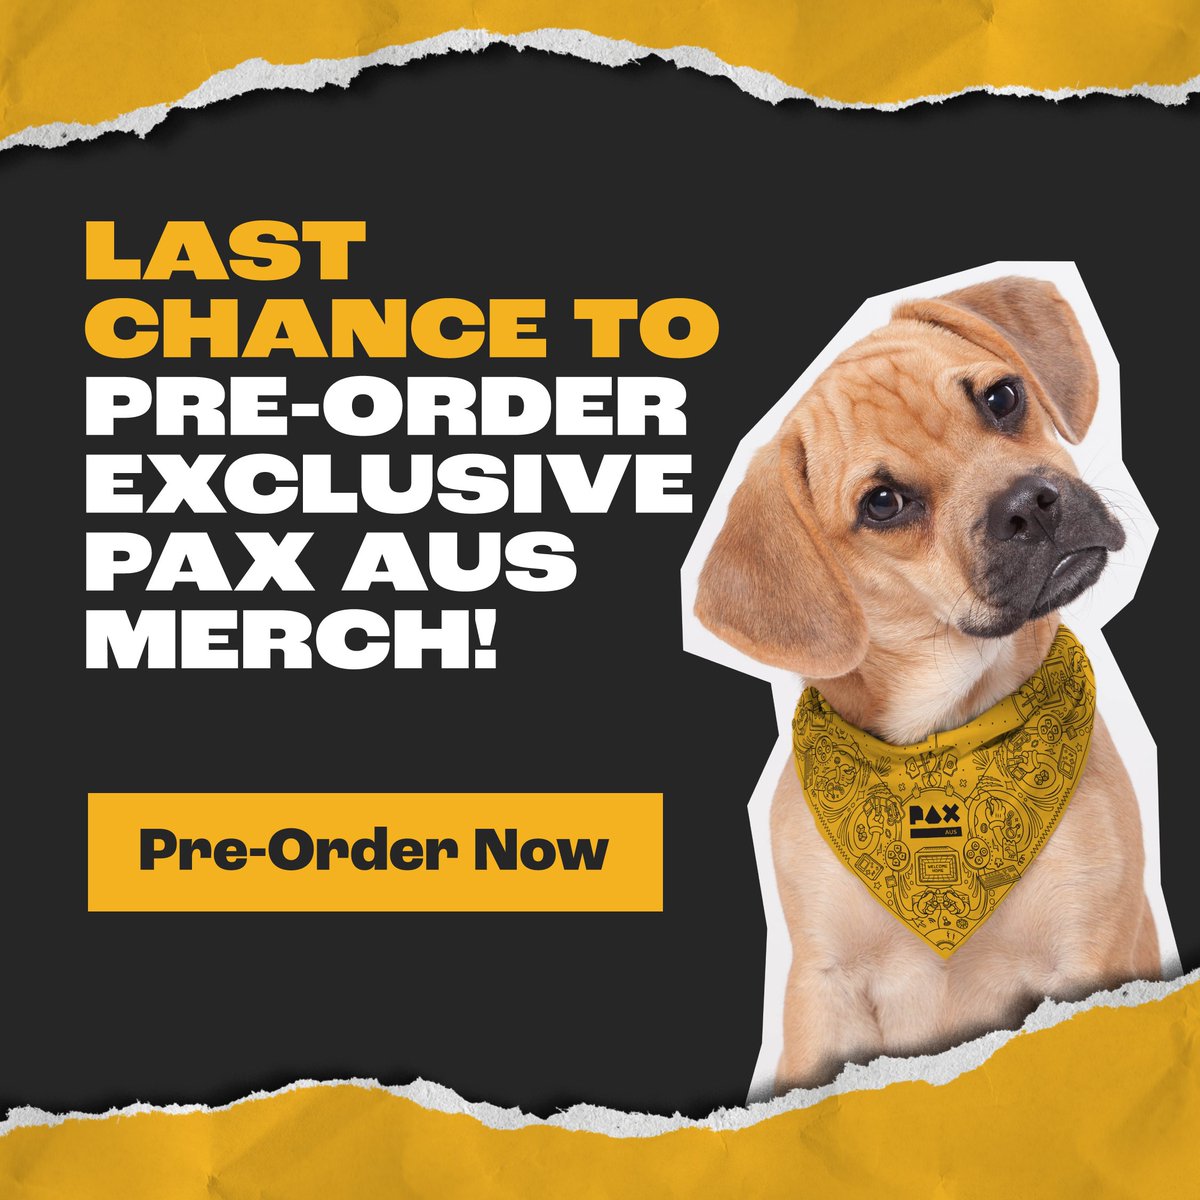 ATTN ALL! Merch Pre-Orders END THIS FRIDAY! This is your last chance to score a snazzy PAX Aus bandana for your pet! Pre-Order Merch & Book Your Badge Here: aus.paxsite.com/en-us/registra…